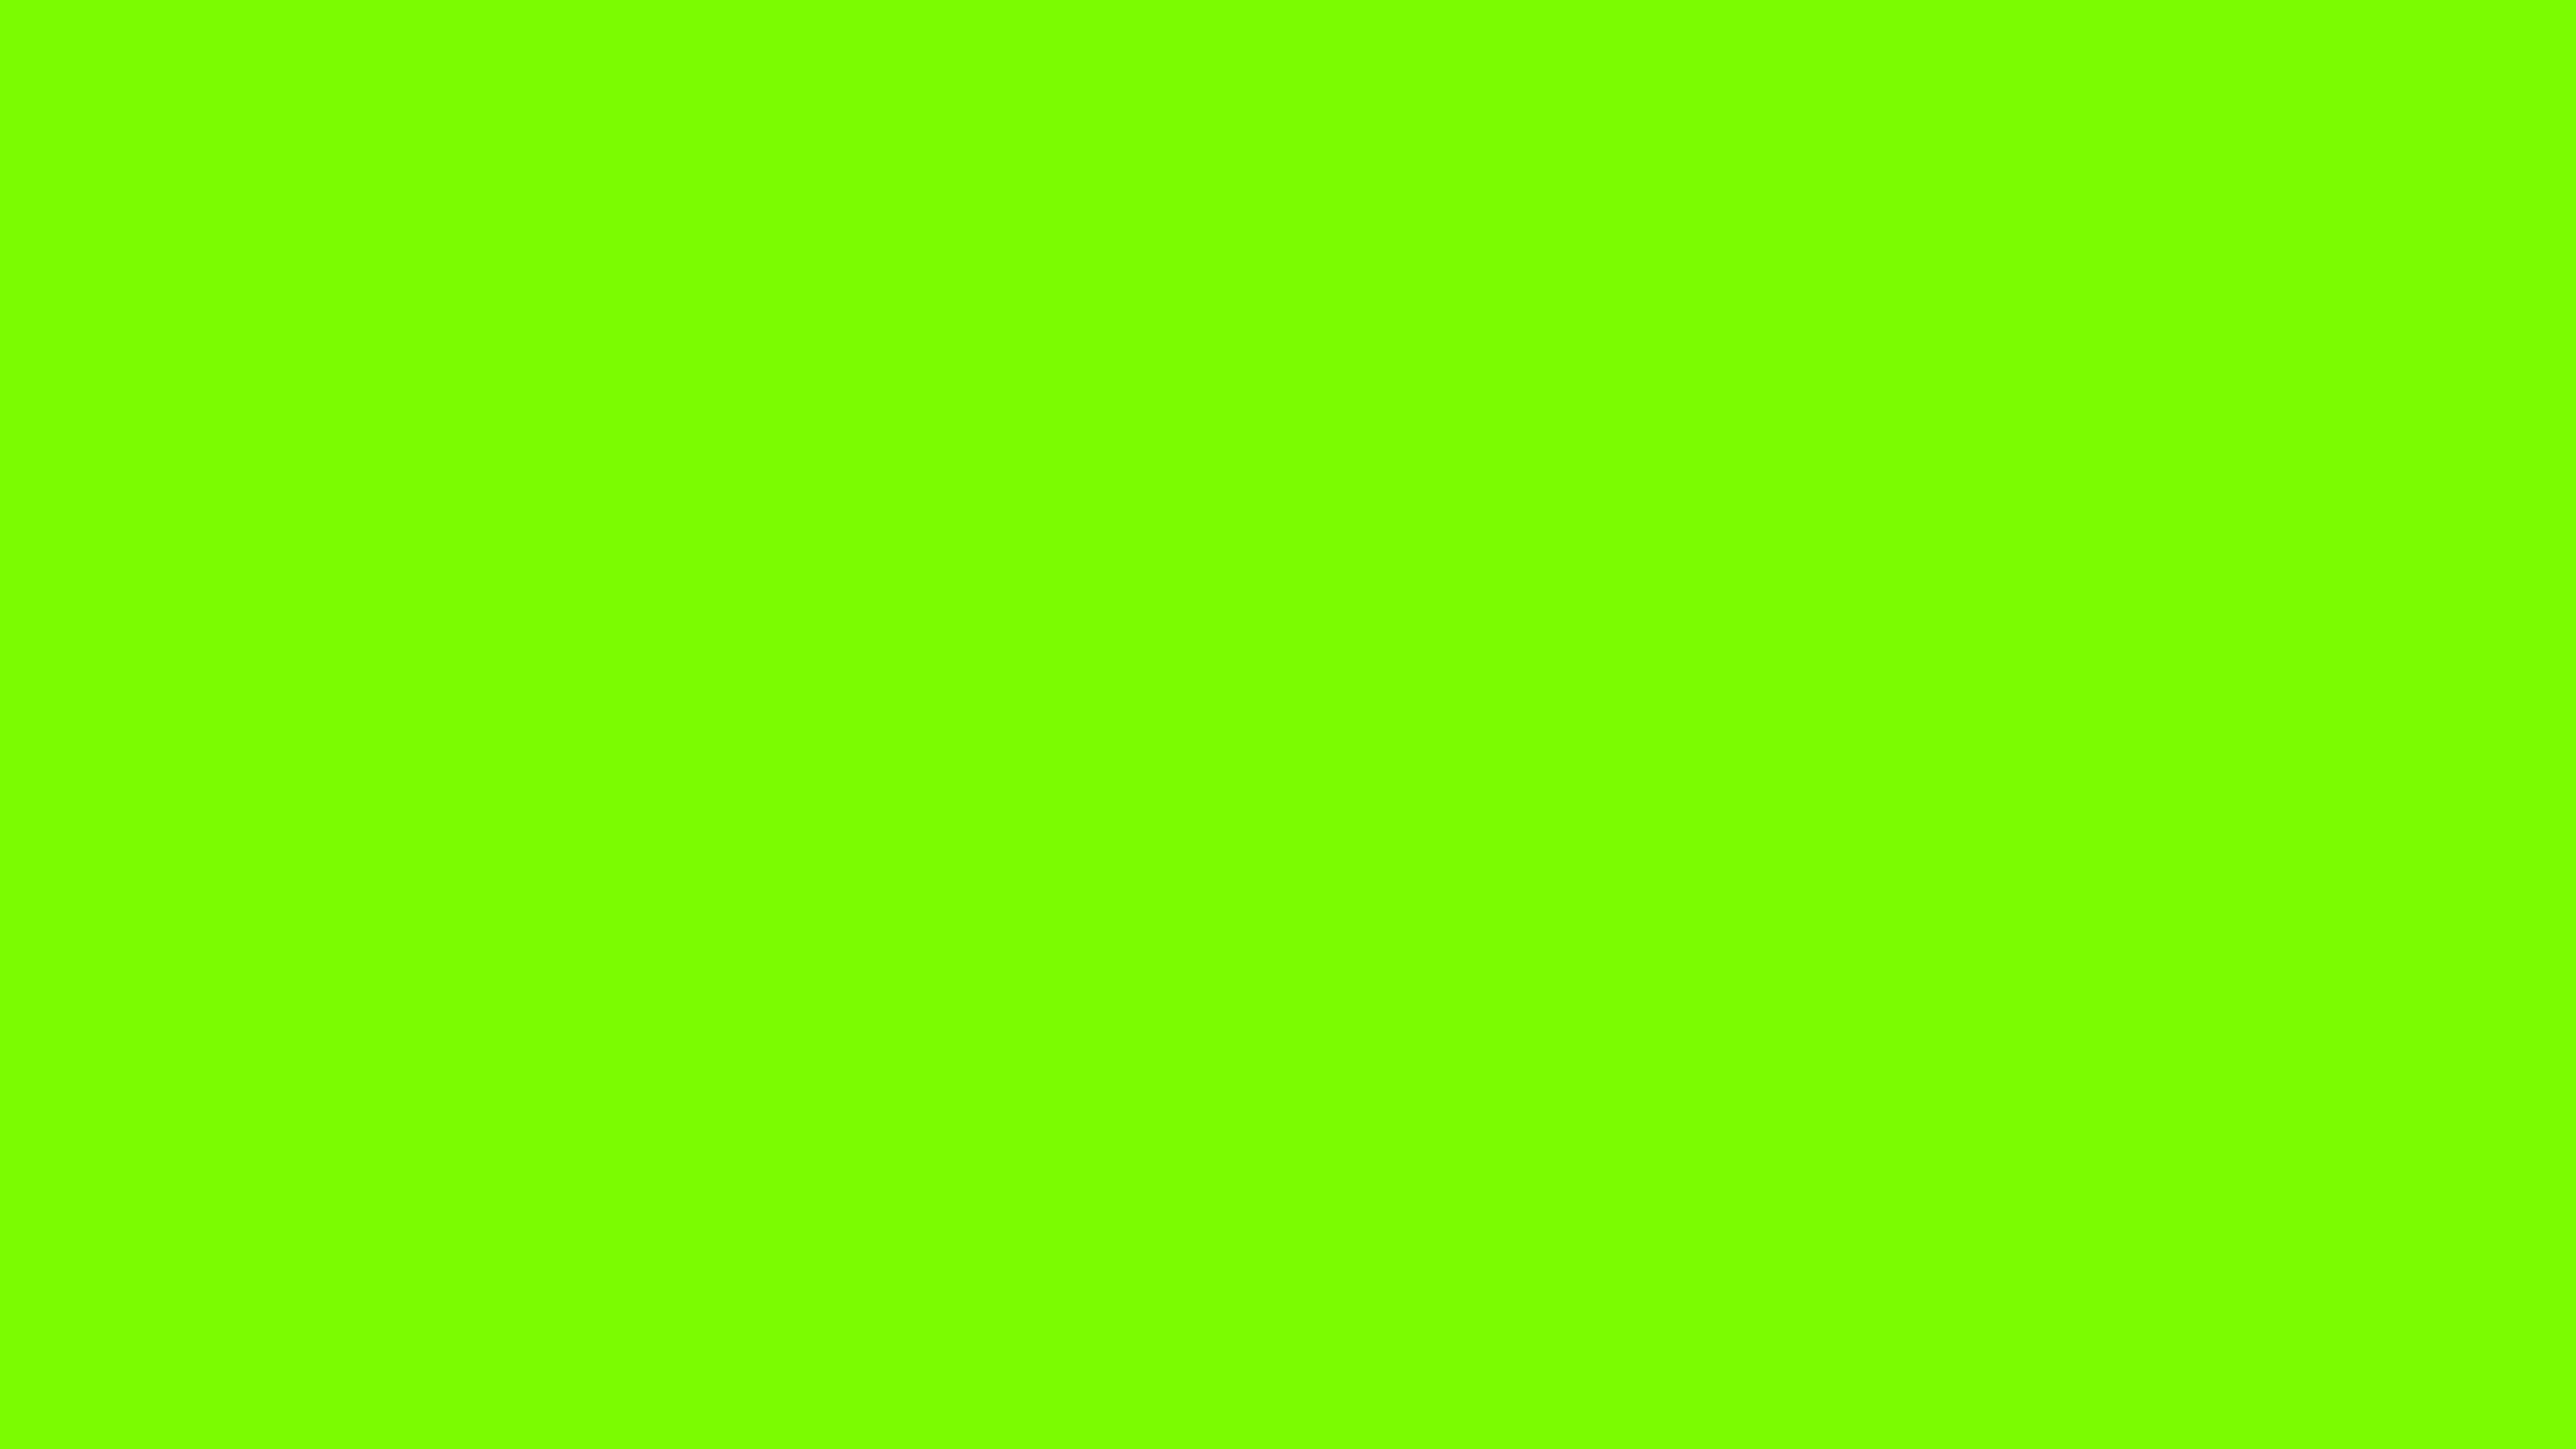 7680x4320 Lawn Green Solid Color Background